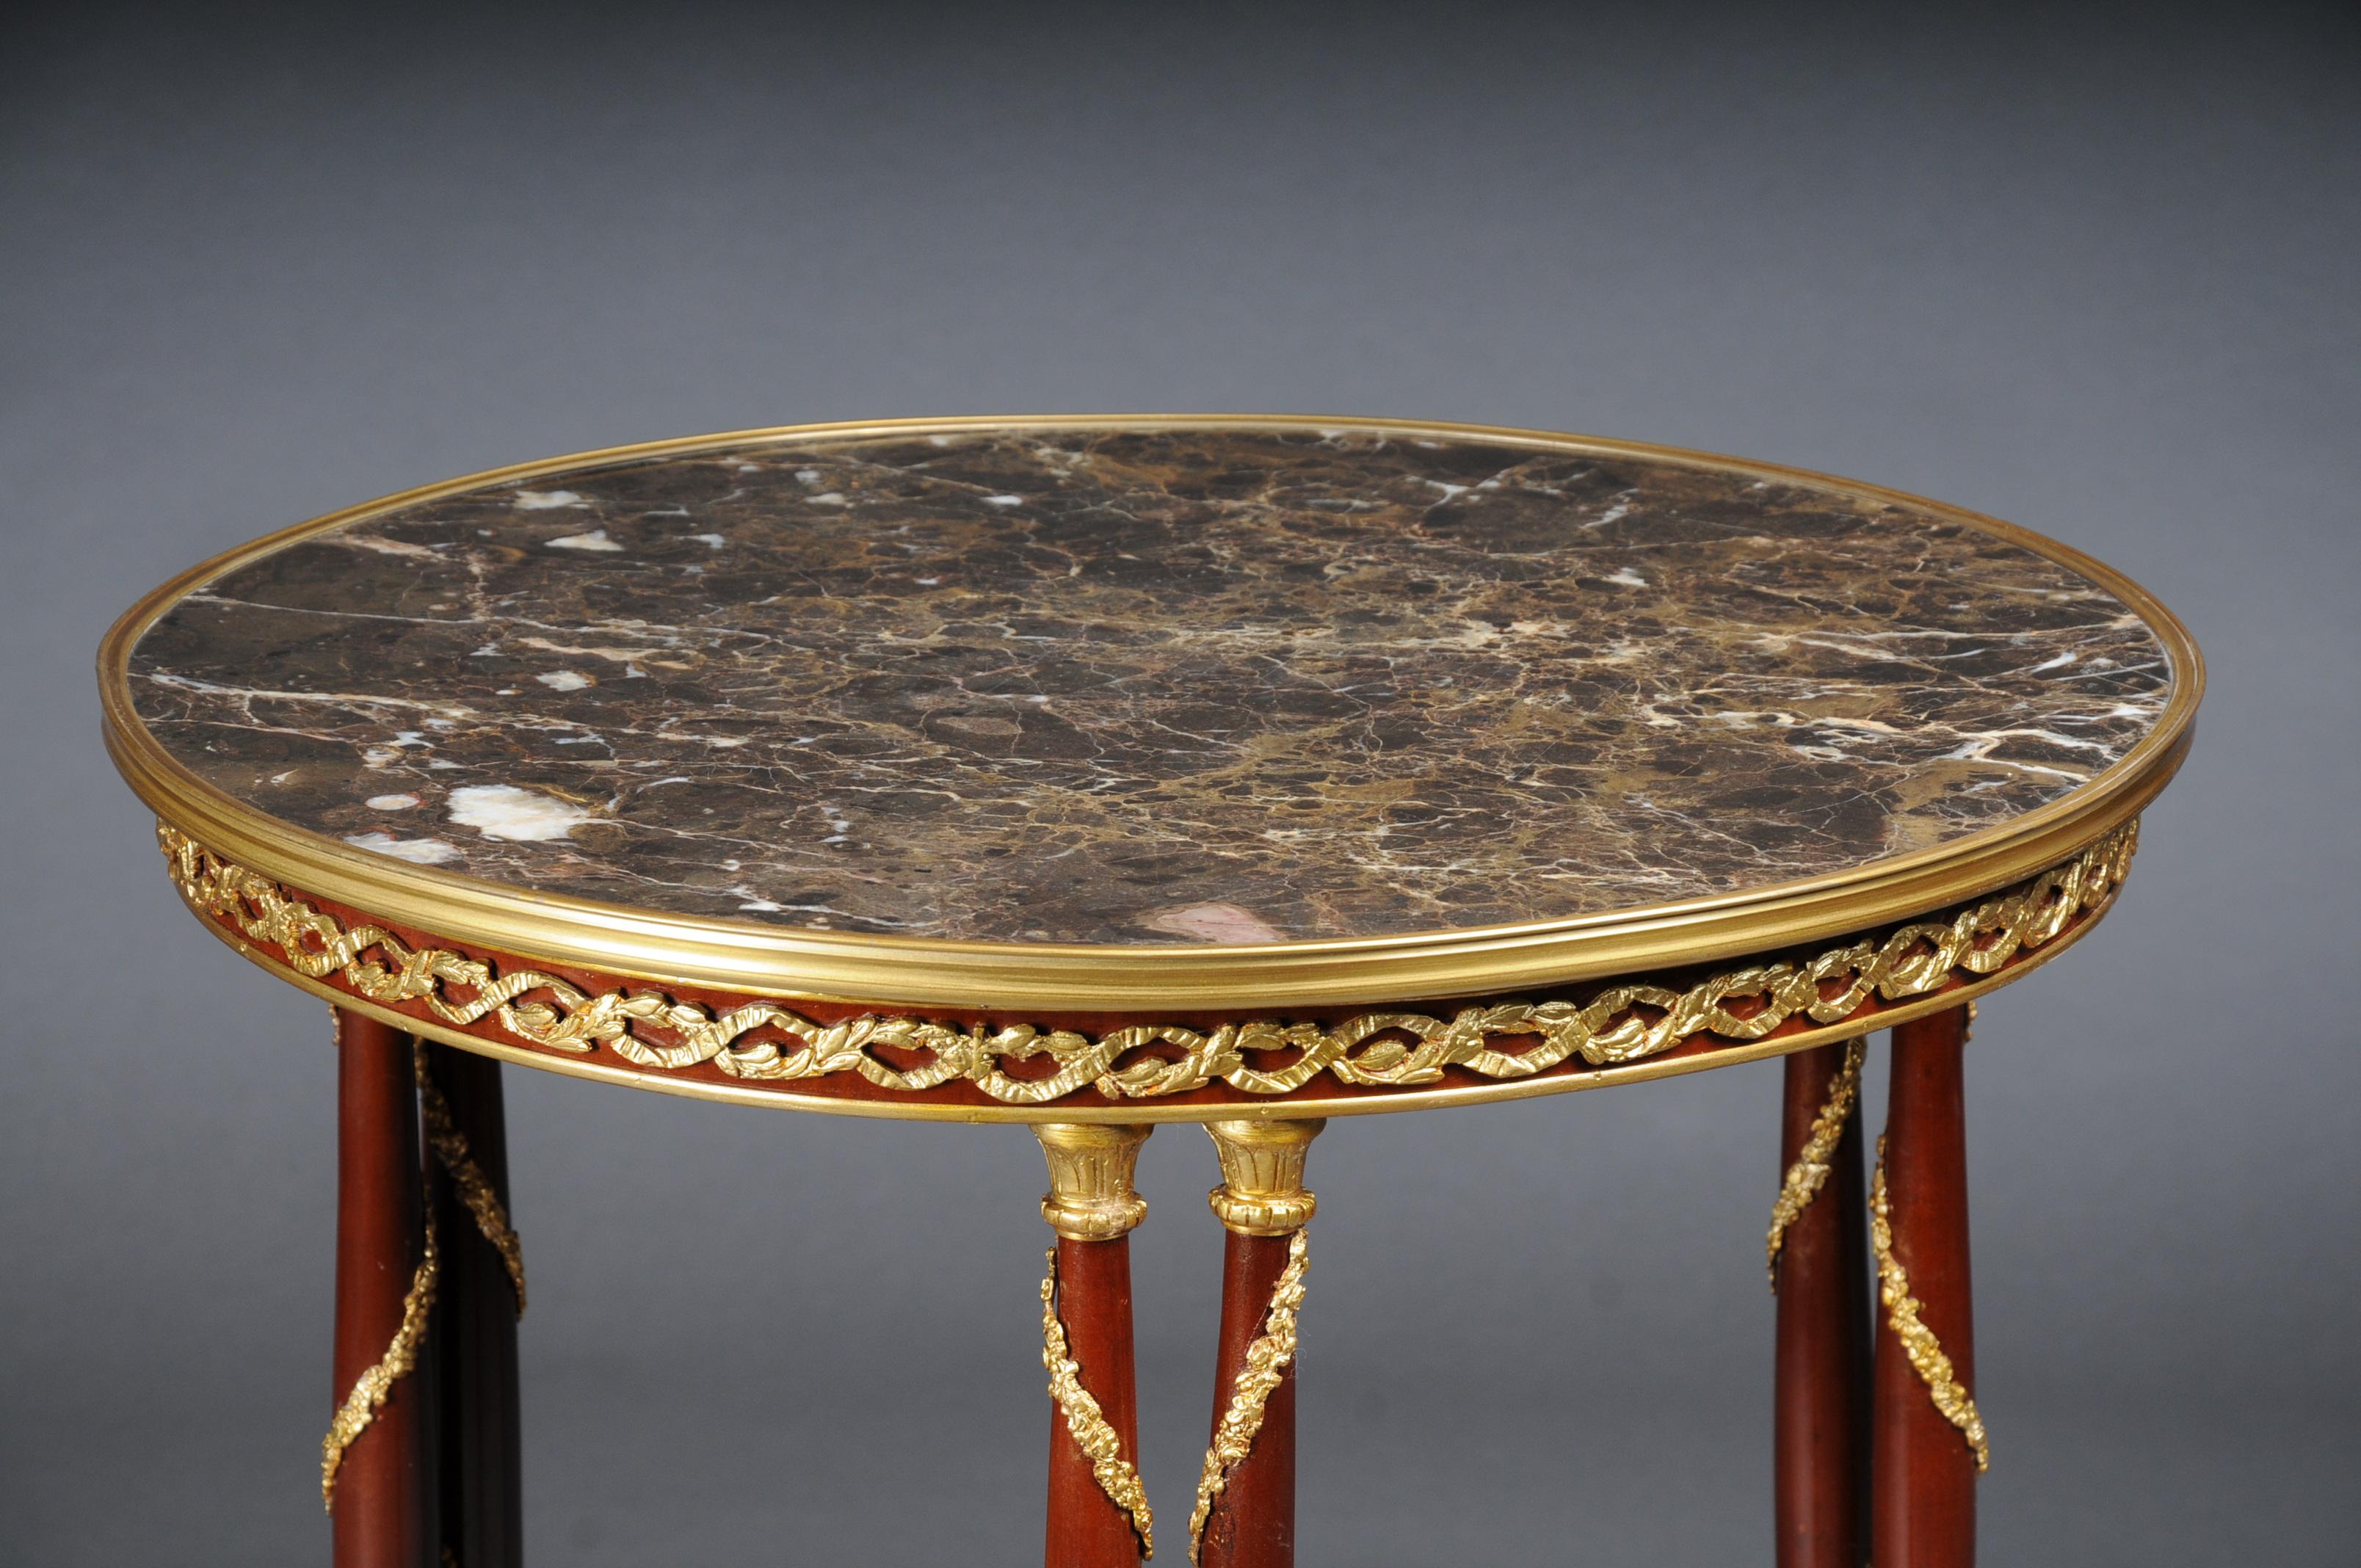 20th Century Majestic Empire Salon Table/Gueridon, Beechwood, Marble In Good Condition For Sale In Berlin, DE